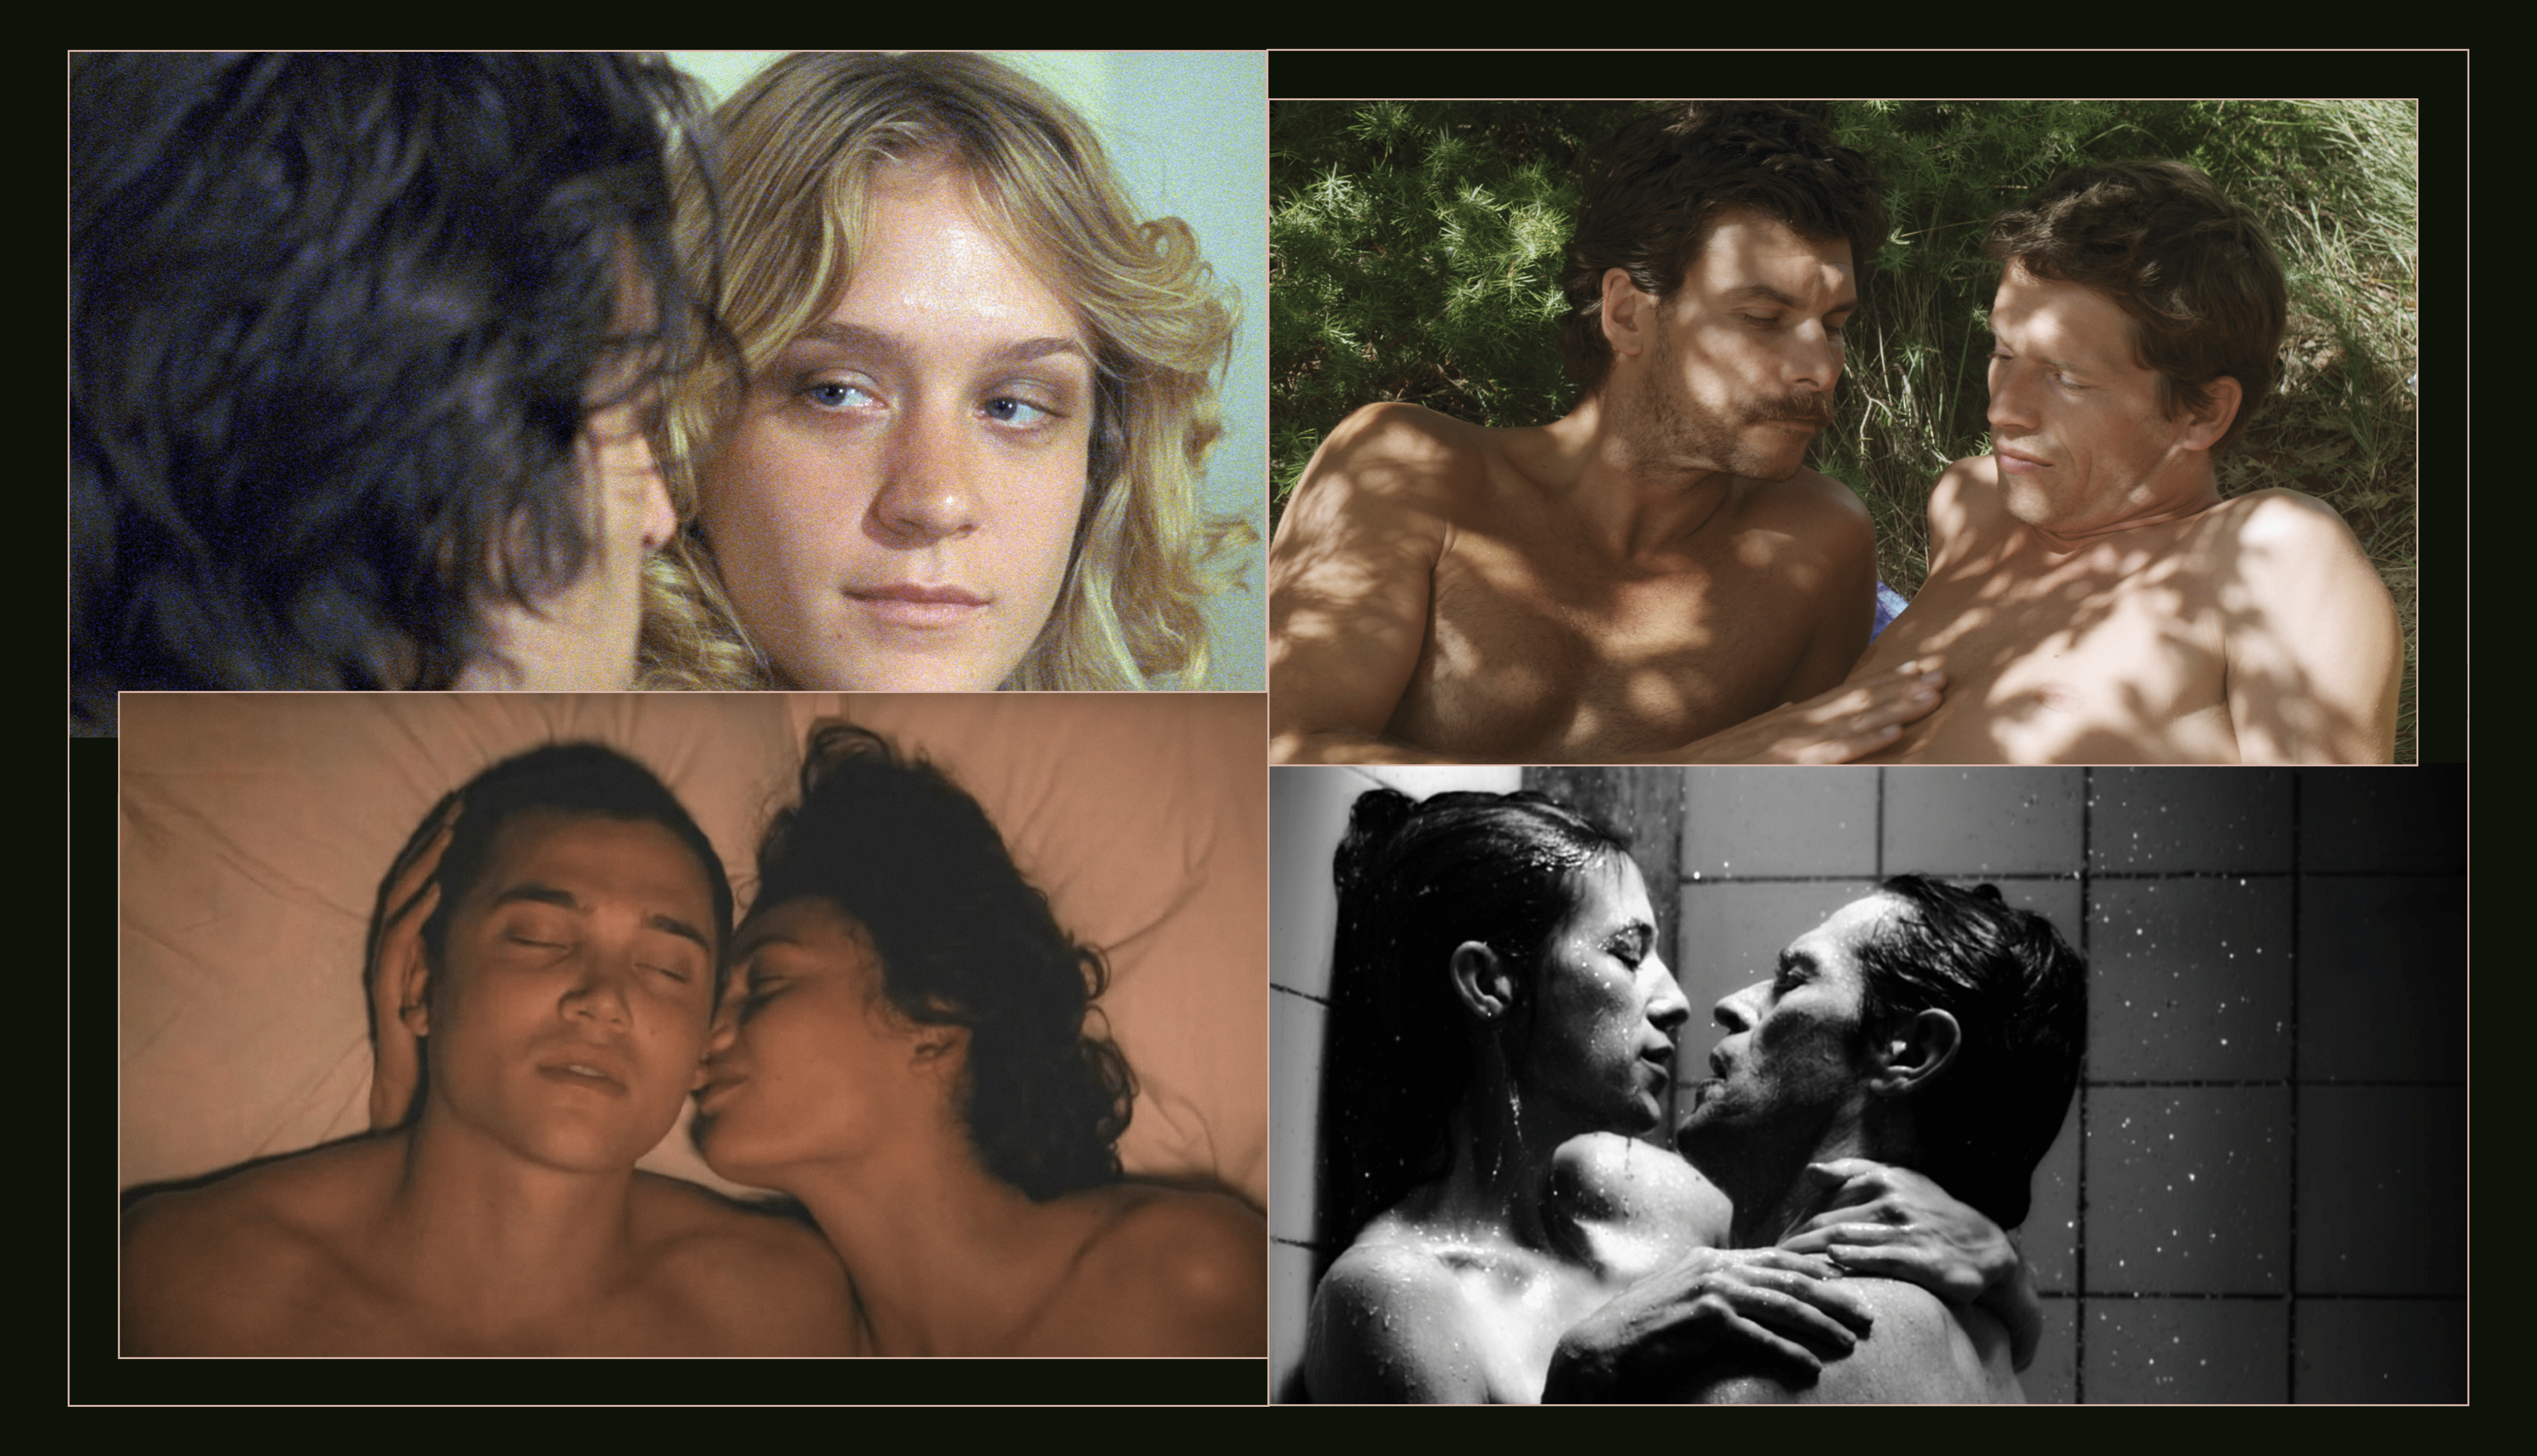 A History of Unsimulated Sex Scenes in 17 Cannes Films, from ‘Mektoub’ to ‘Antichrist’ to ‘Caligula’